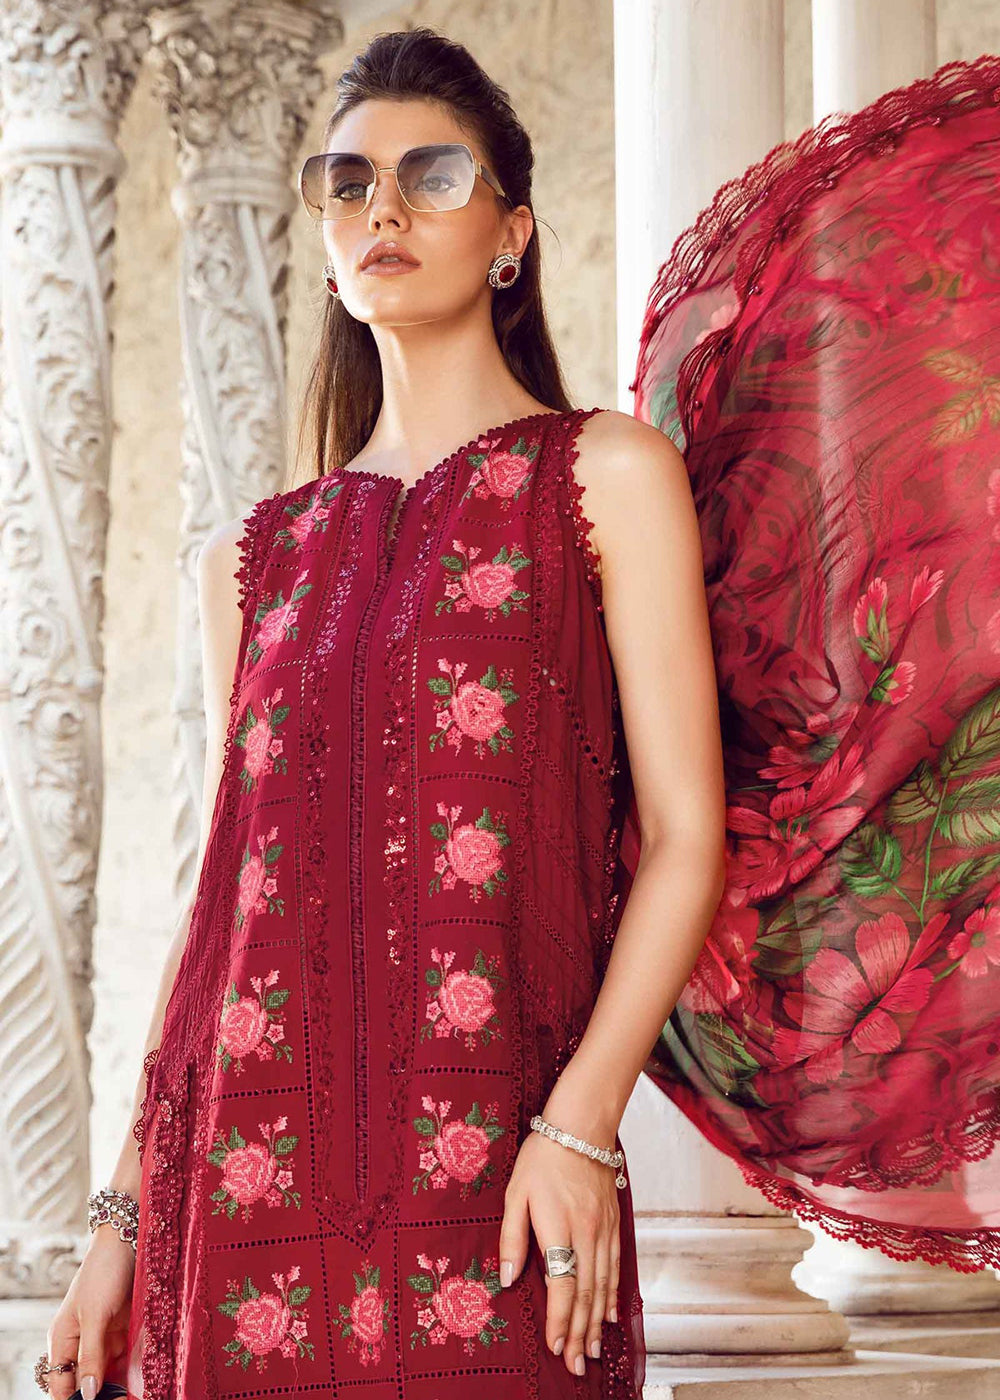 Buy Now Unstitched Luxury Lawn Eid 2 Edition '24 by Maria B | EL-24-05 Online at Empress in USA, UK, Canada, Germany, Italy, Dubai & Worldwide at Empress Clothing.